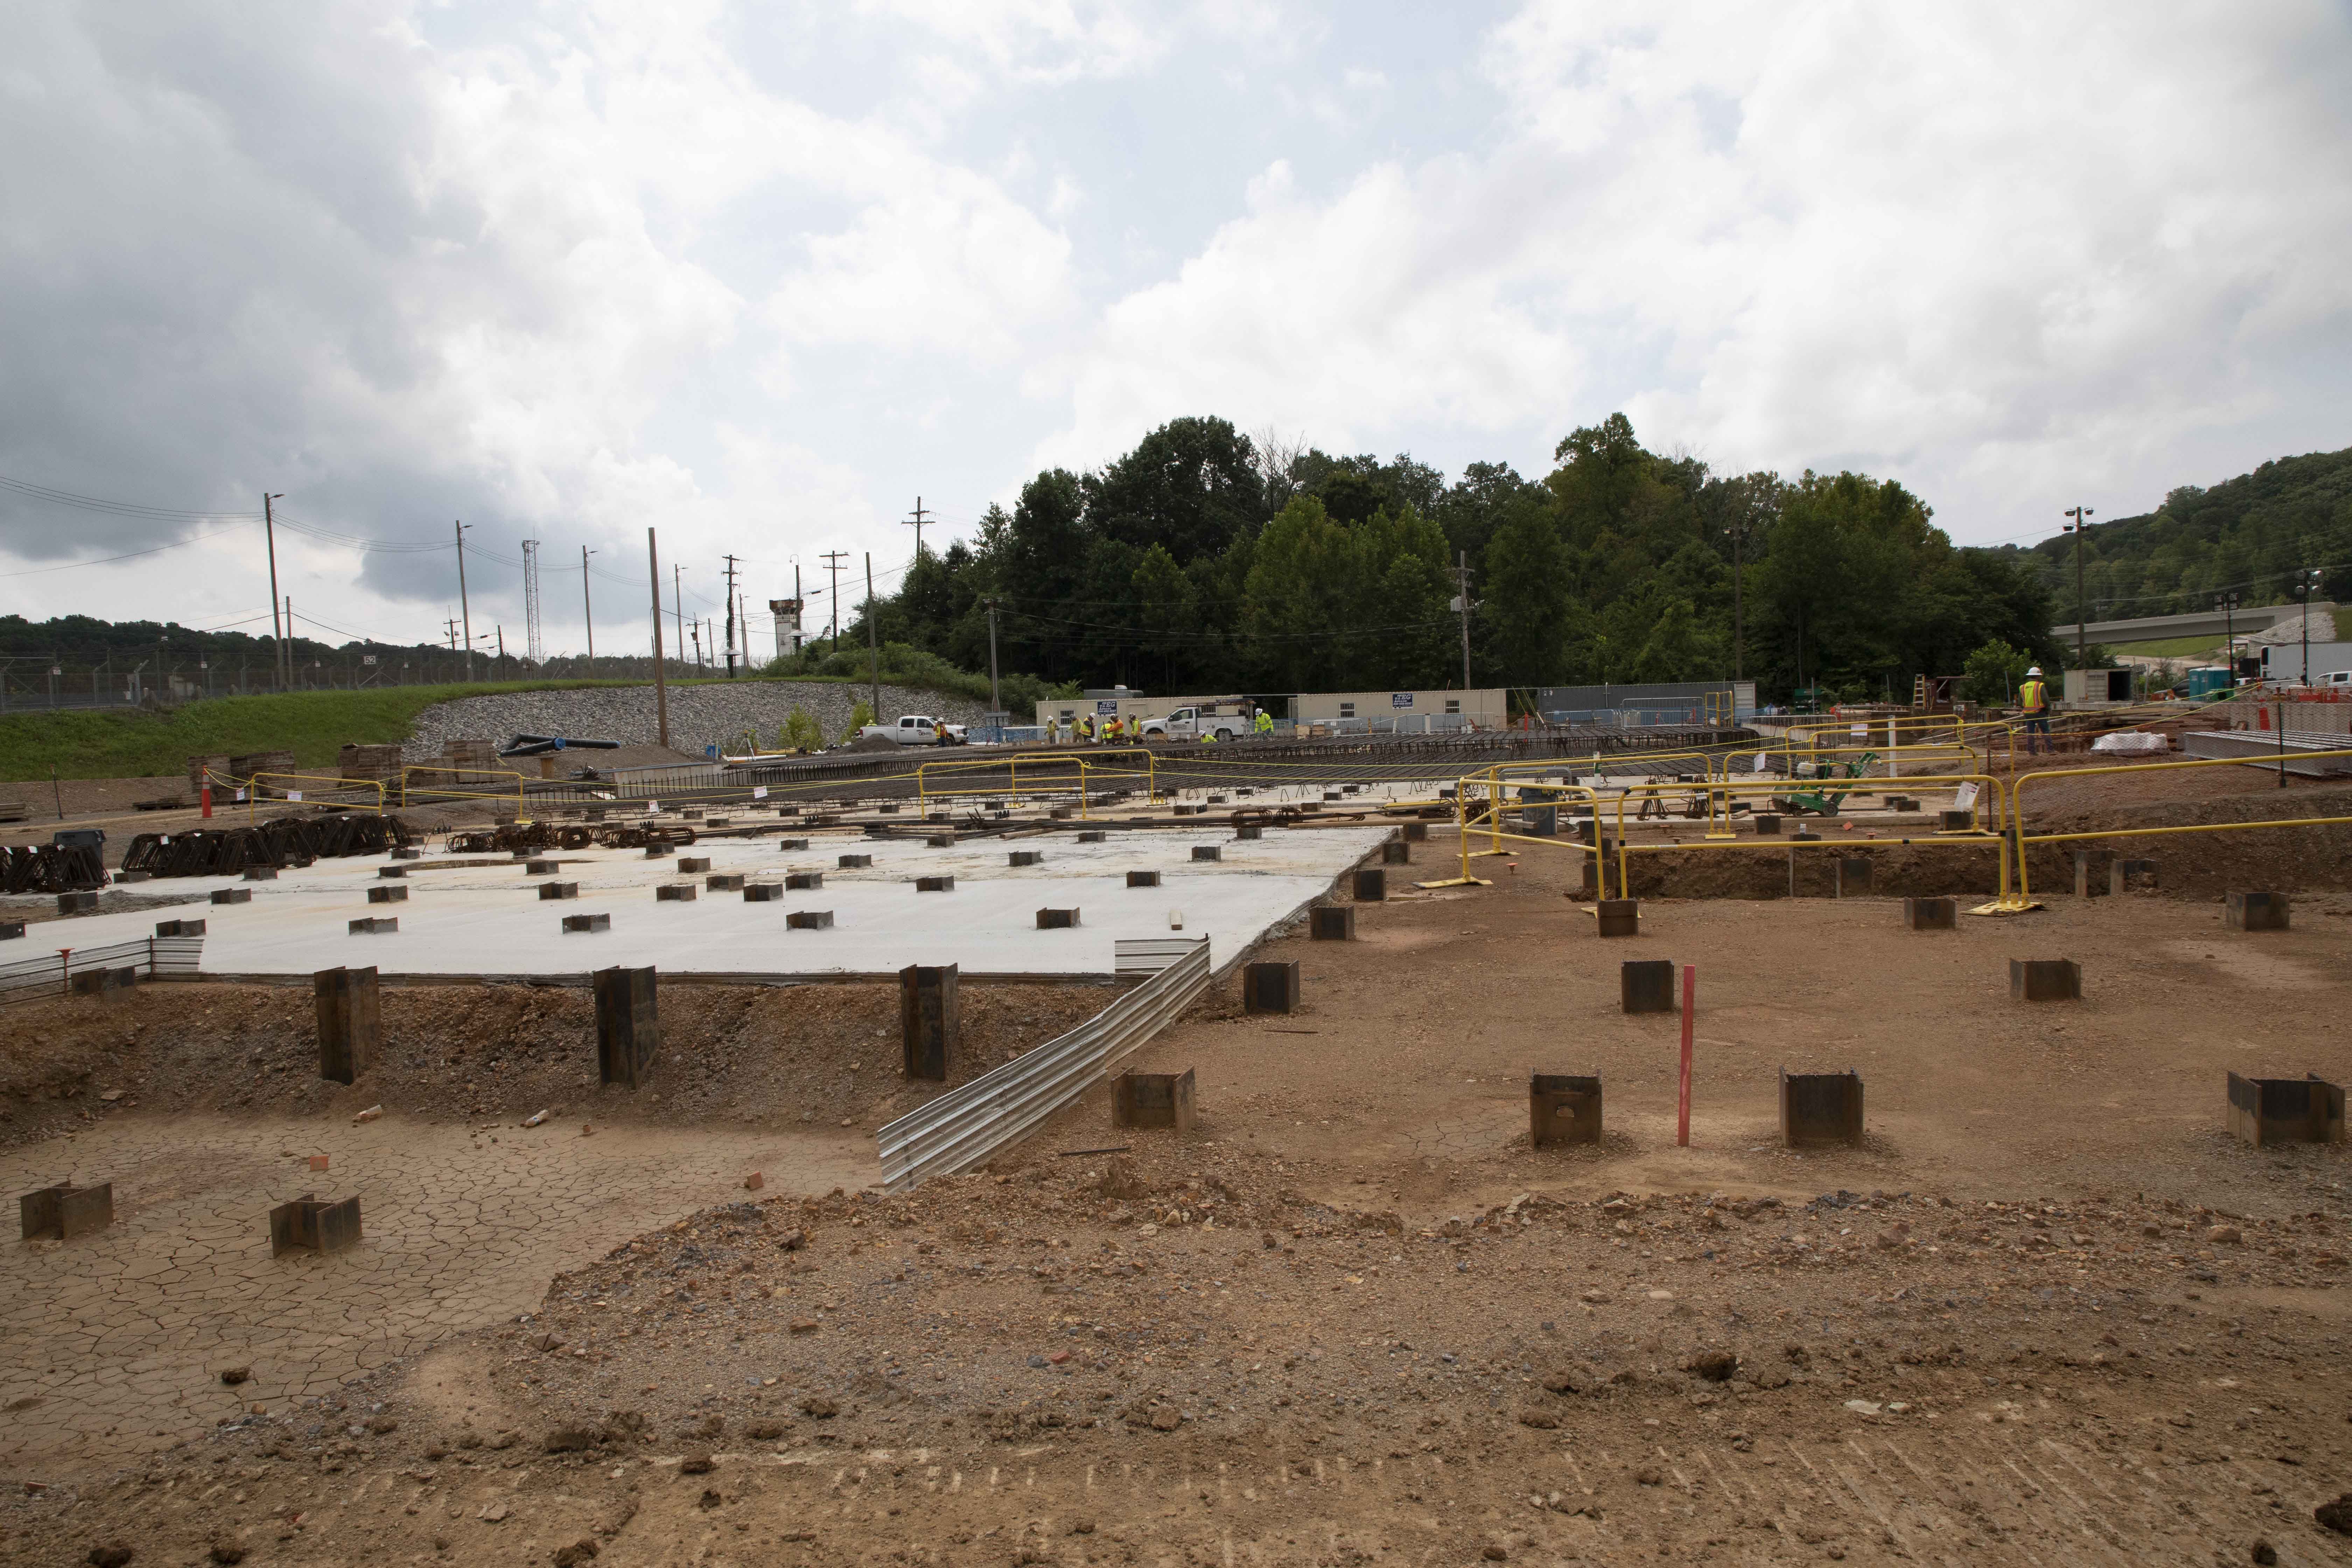 The Process Support Facilities (PSF) is laying the groundwork for vertical construction with the completion of excavation and mud mat placements.